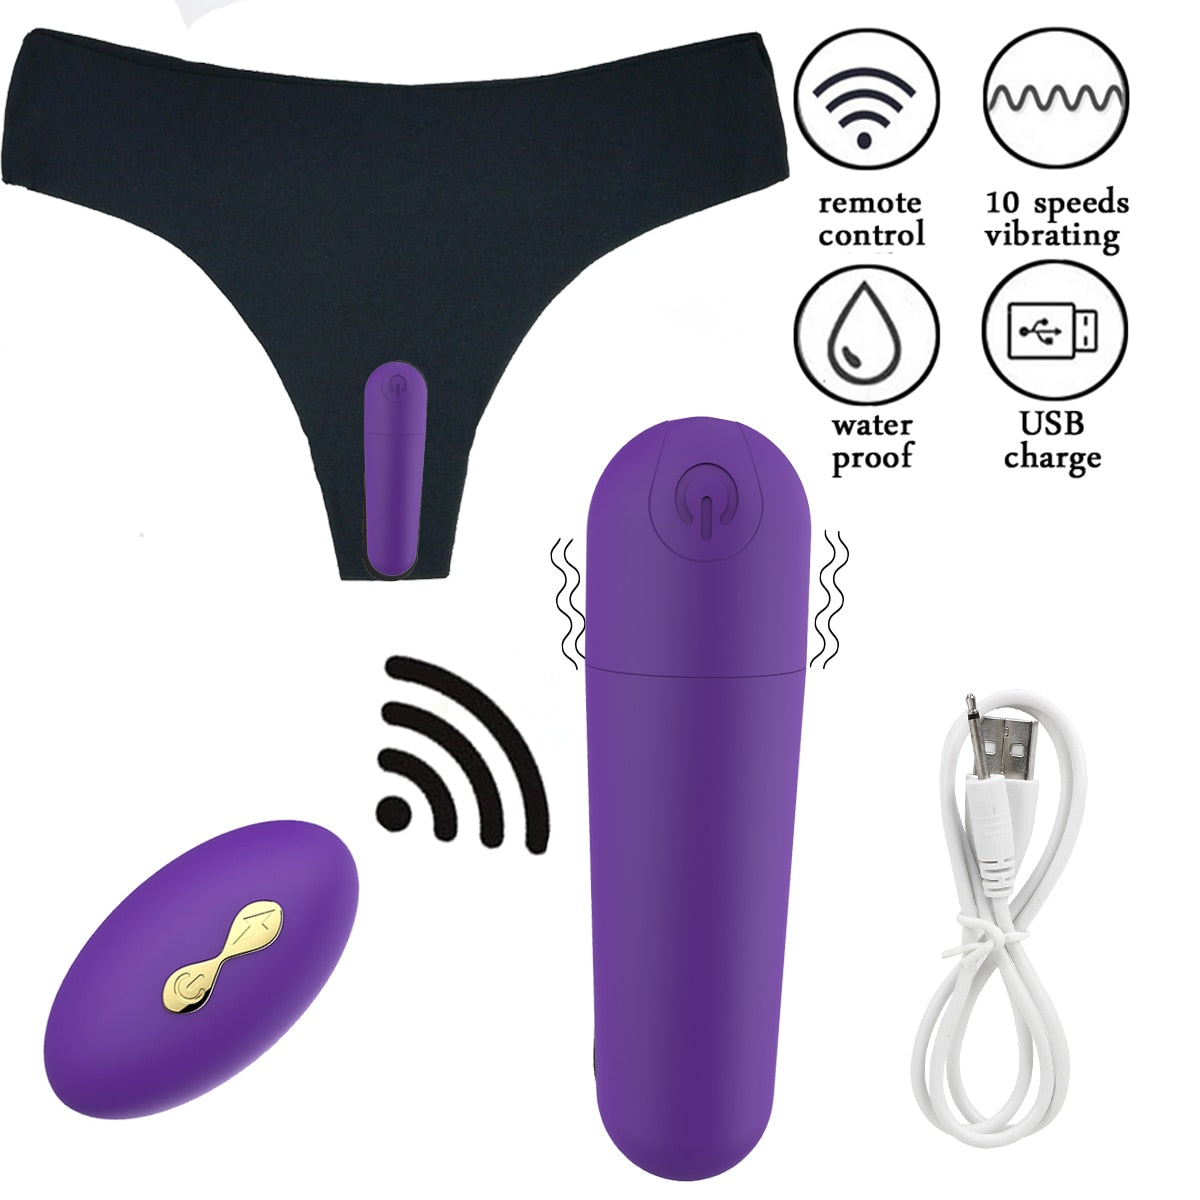 Everything You Need to Know About Vibrating Panties